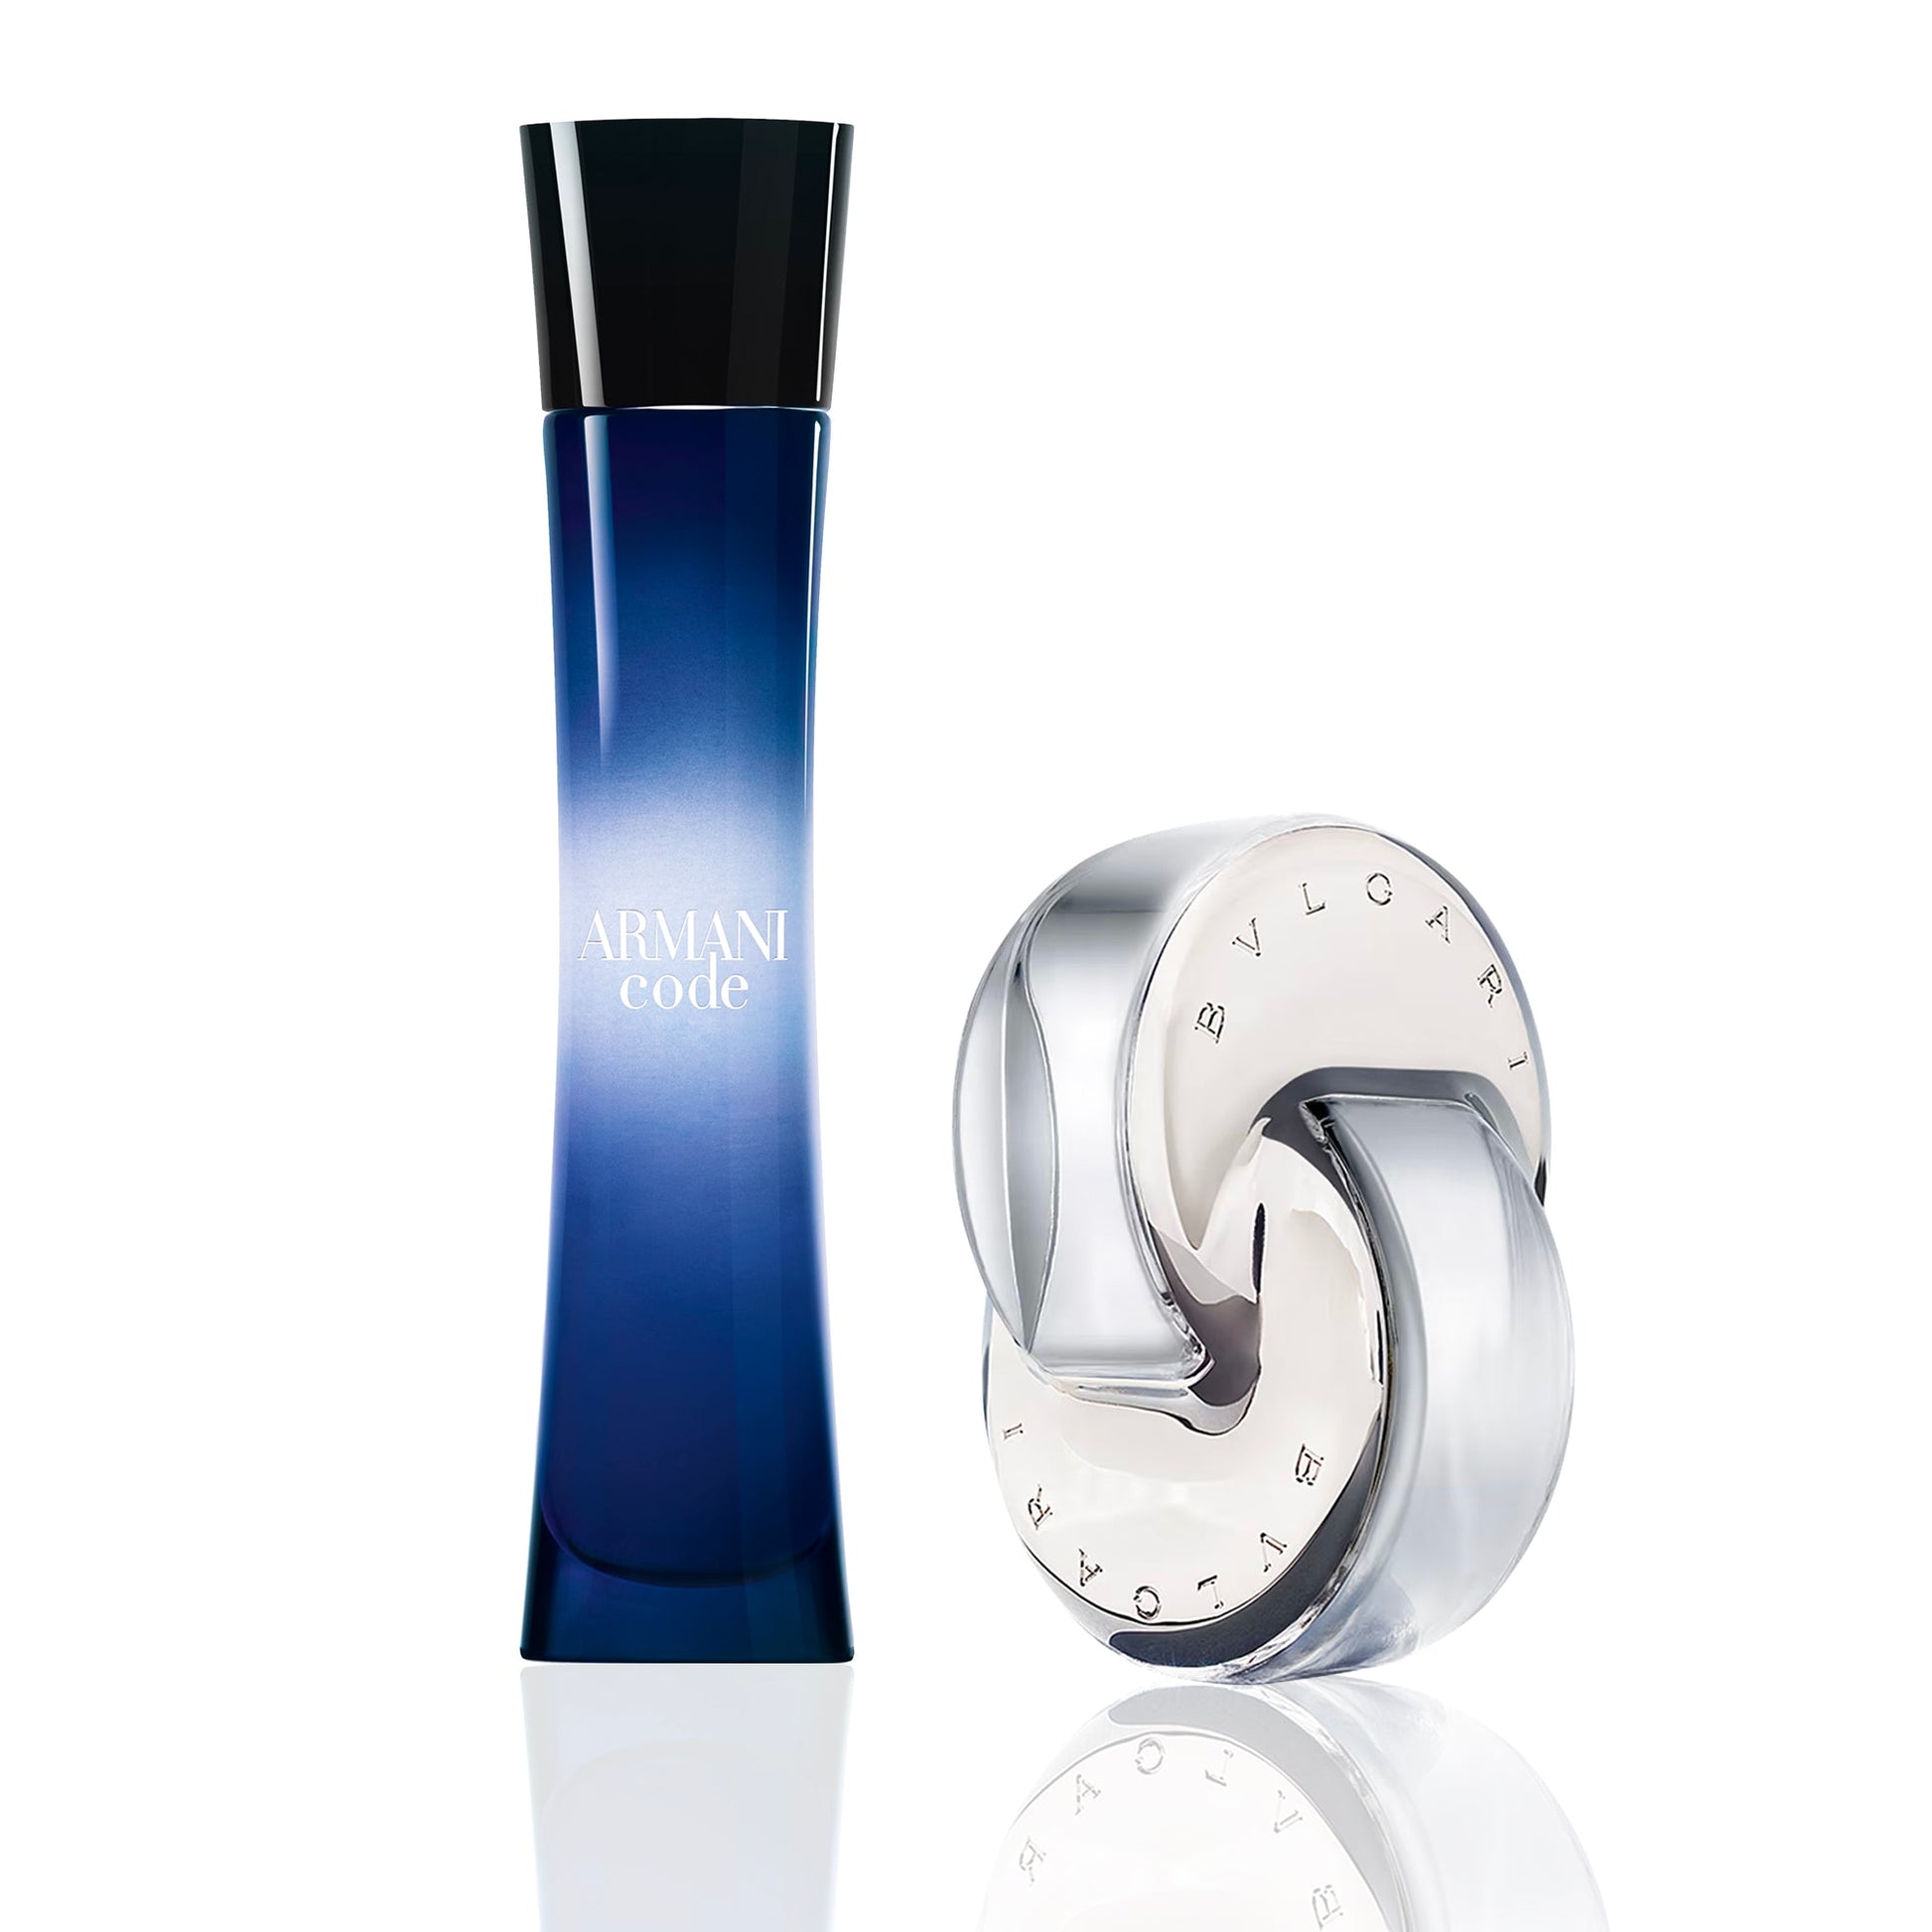 Bundle Deal For Women: Armani Code by Giorgio Armani and Omnia Crystalline by Bvlgari, Product image 1